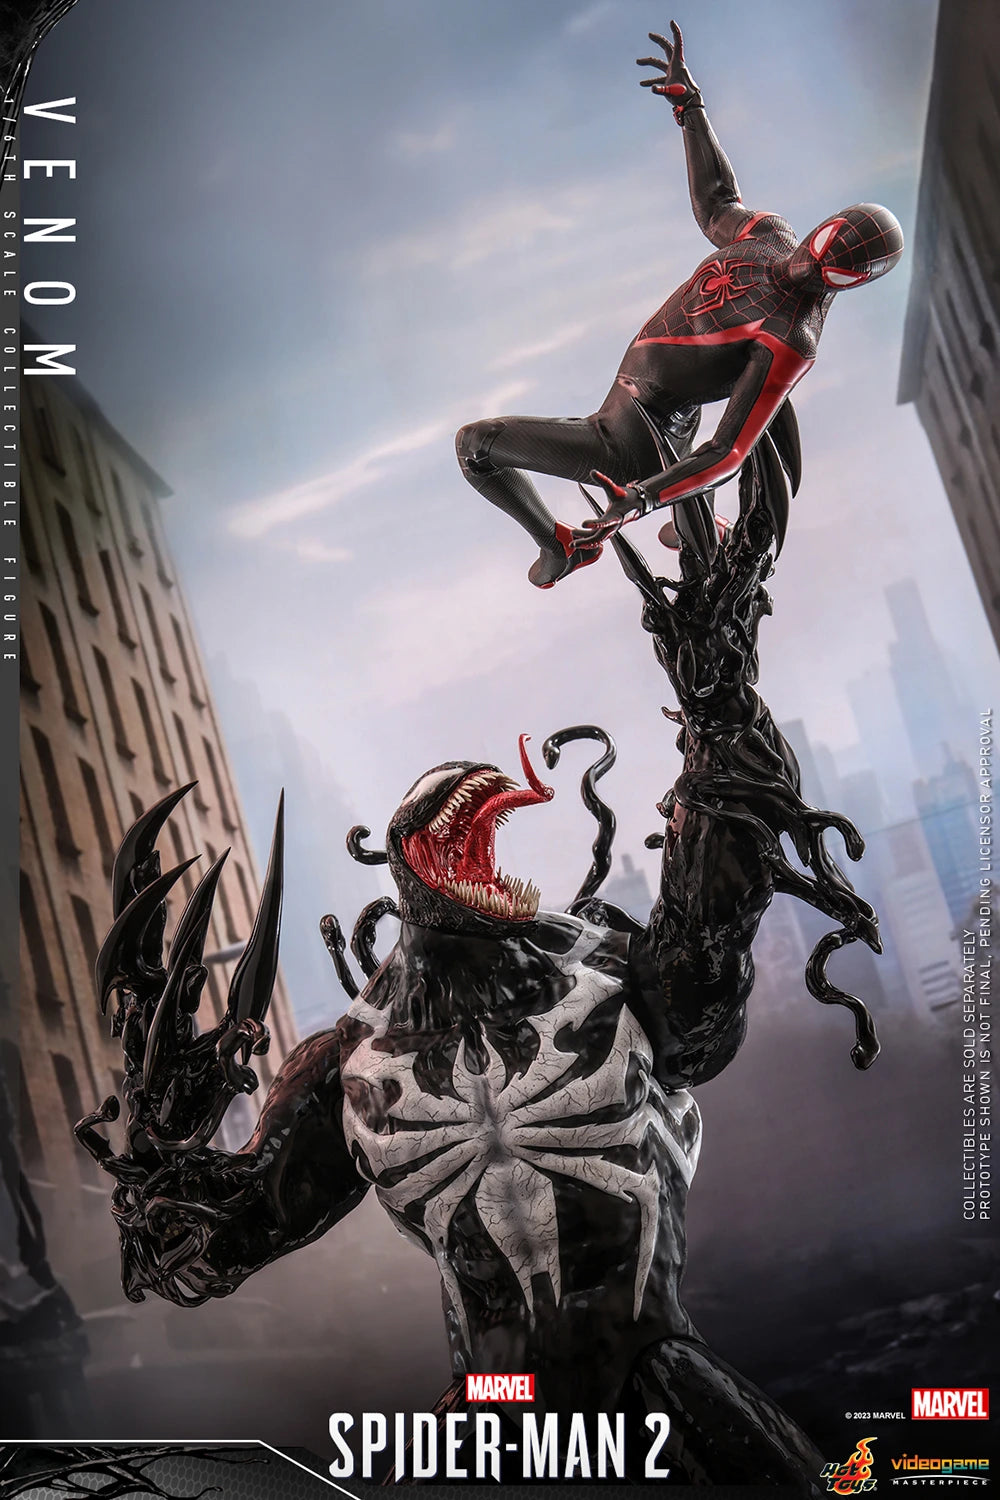 VENOM Sixth Scale Figure by Hot Toys